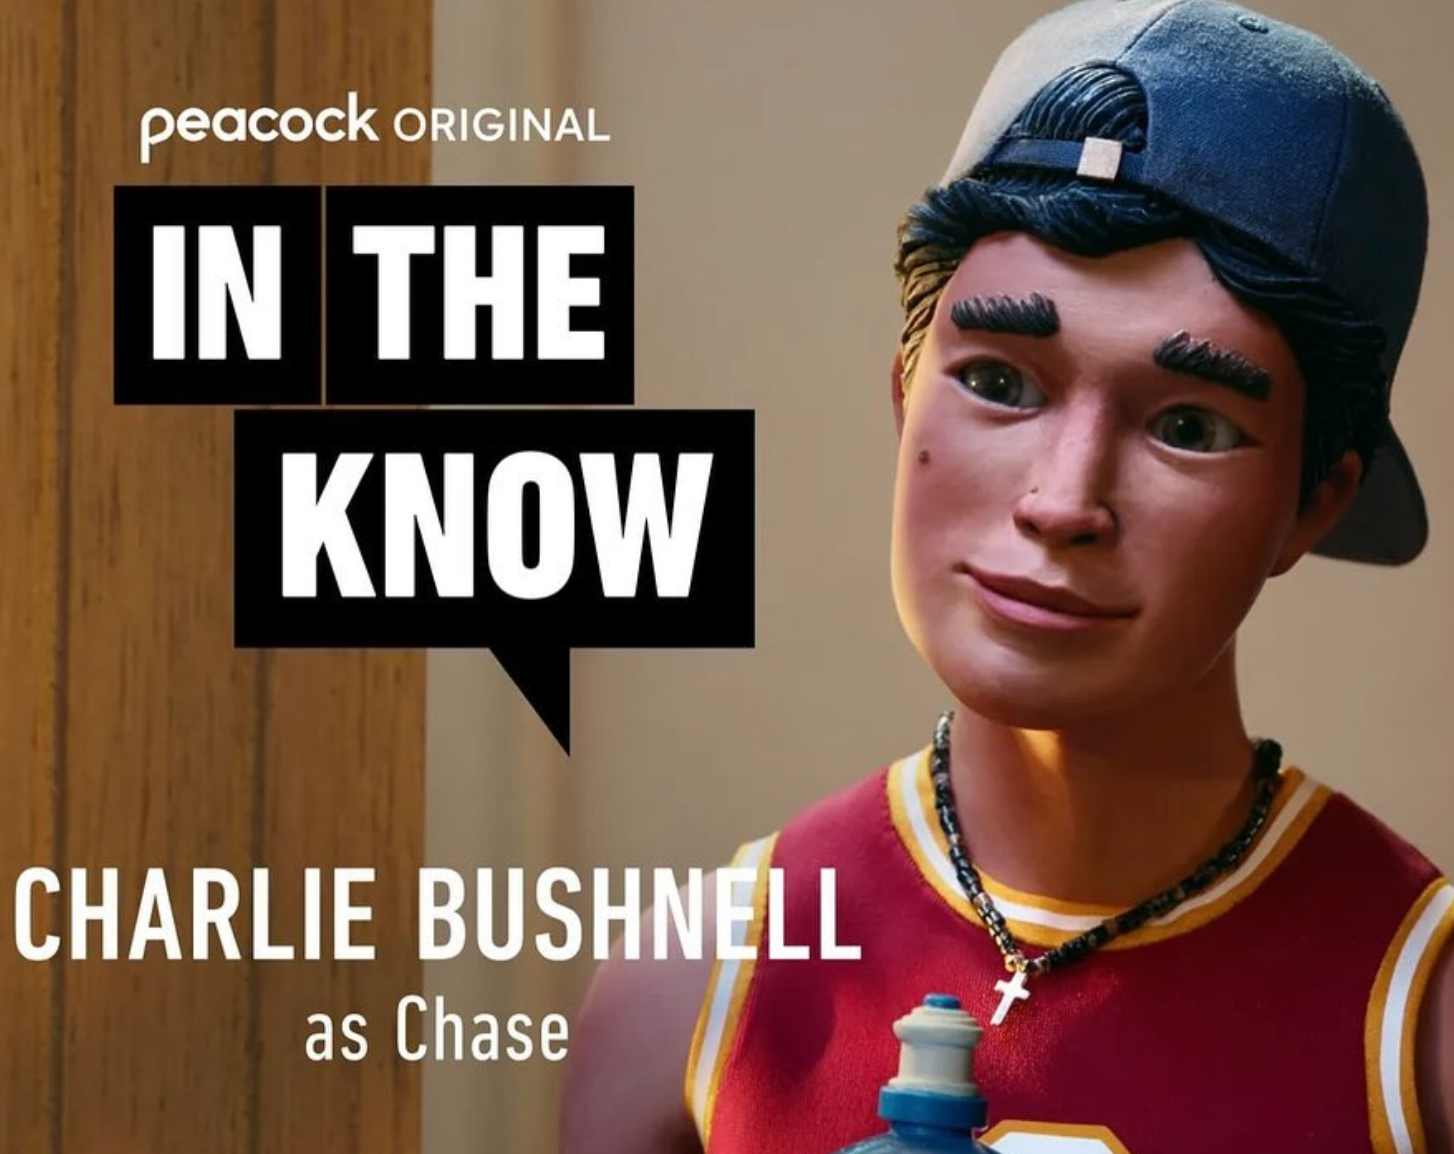 Charlie-bushnell-in-the-know-peacock